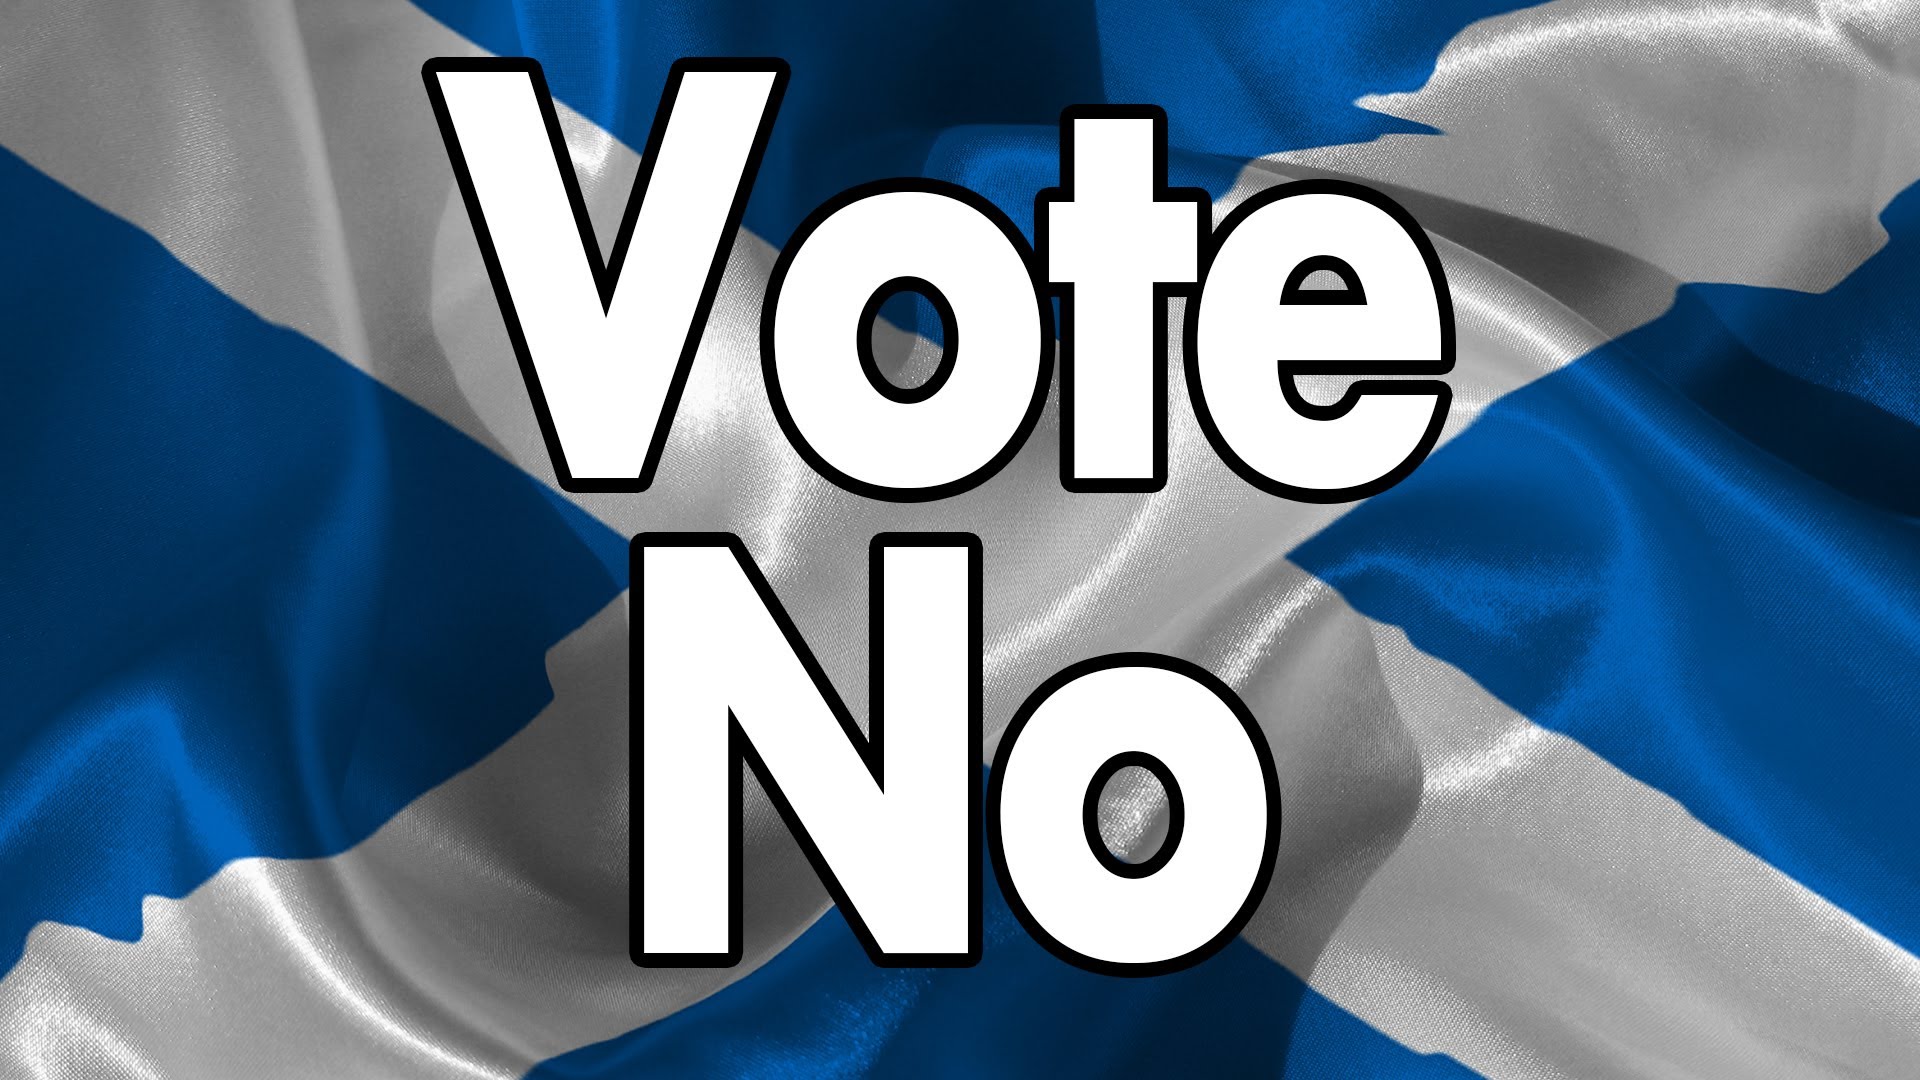 Scotland says no to independence